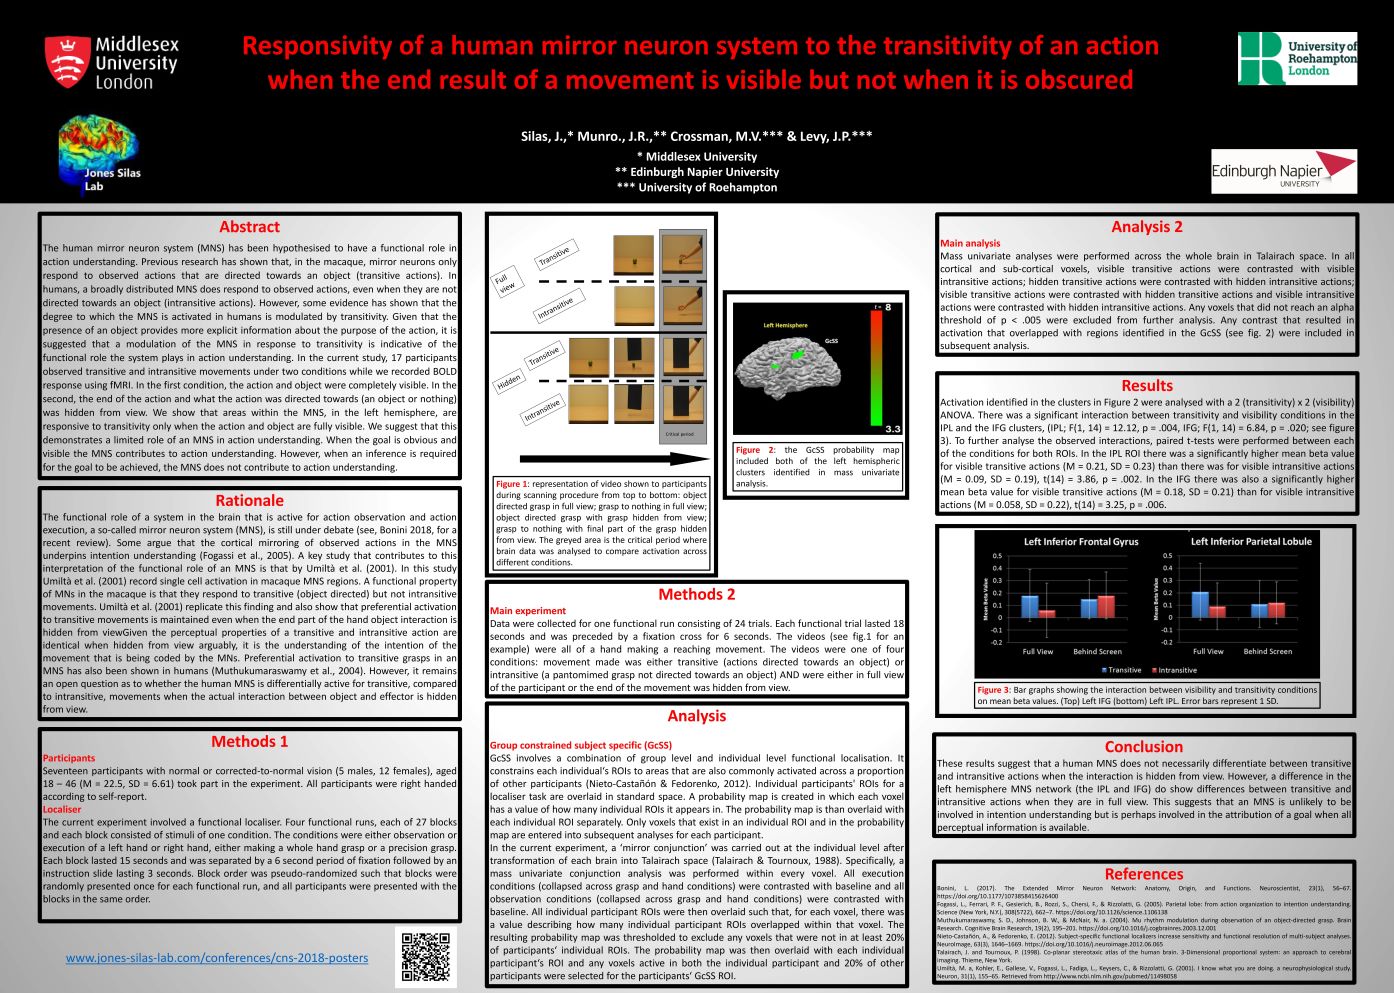 Responsivity of a human mirror neuron system to the transitivity of an action when the end result of a movement is visible but not when it is obscured - CNS 2018